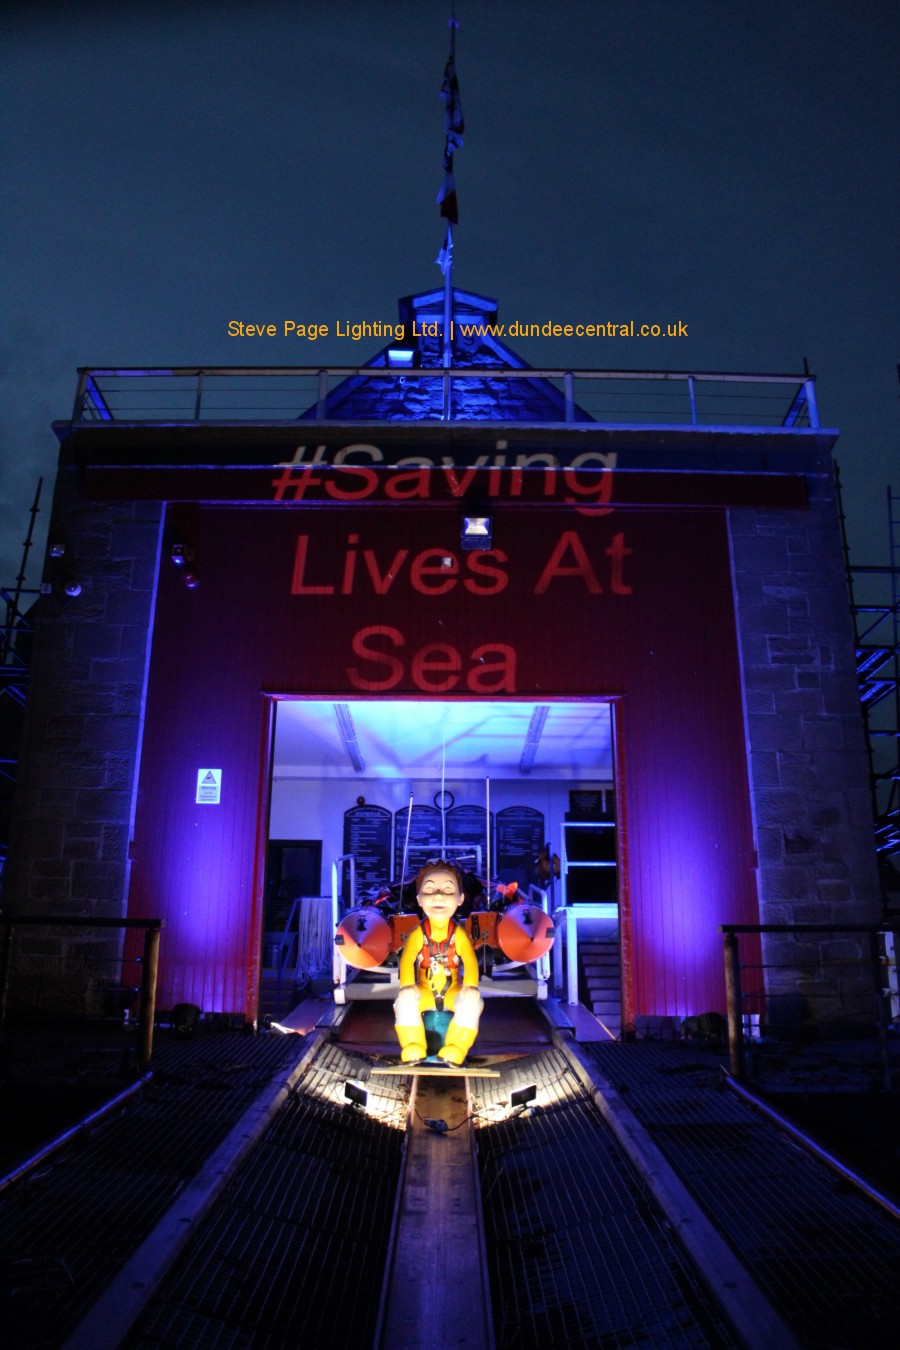 Broughty Ferry Lifeboat Station event - outdoor lights and projector